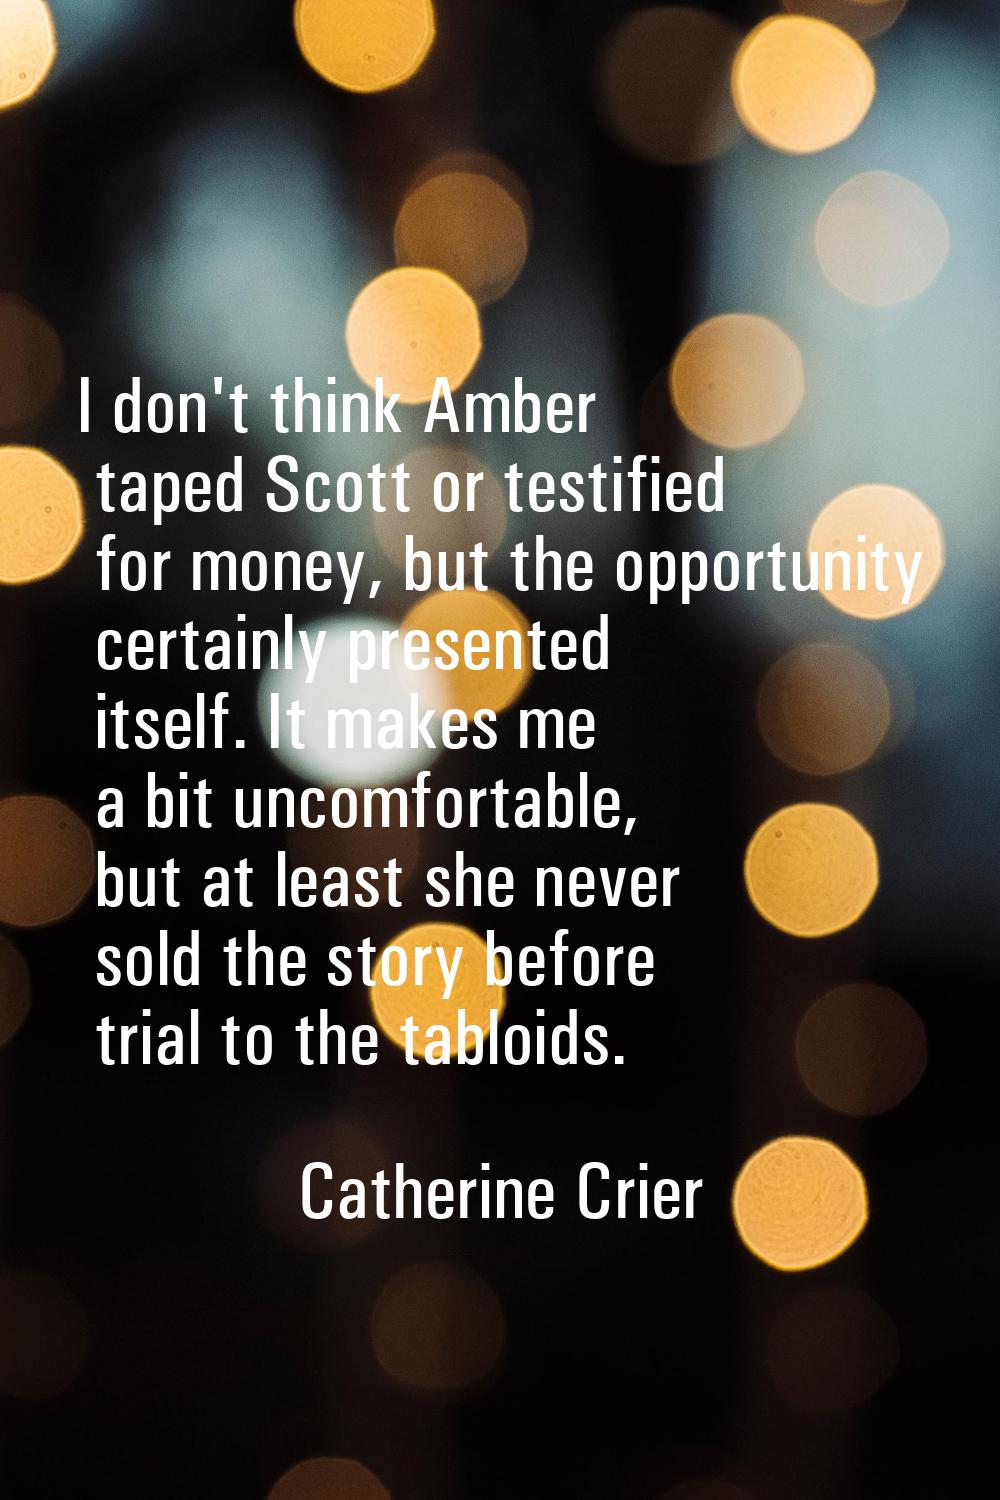 I don't think Amber taped Scott or testified for money, but the opportunity certainly presented its